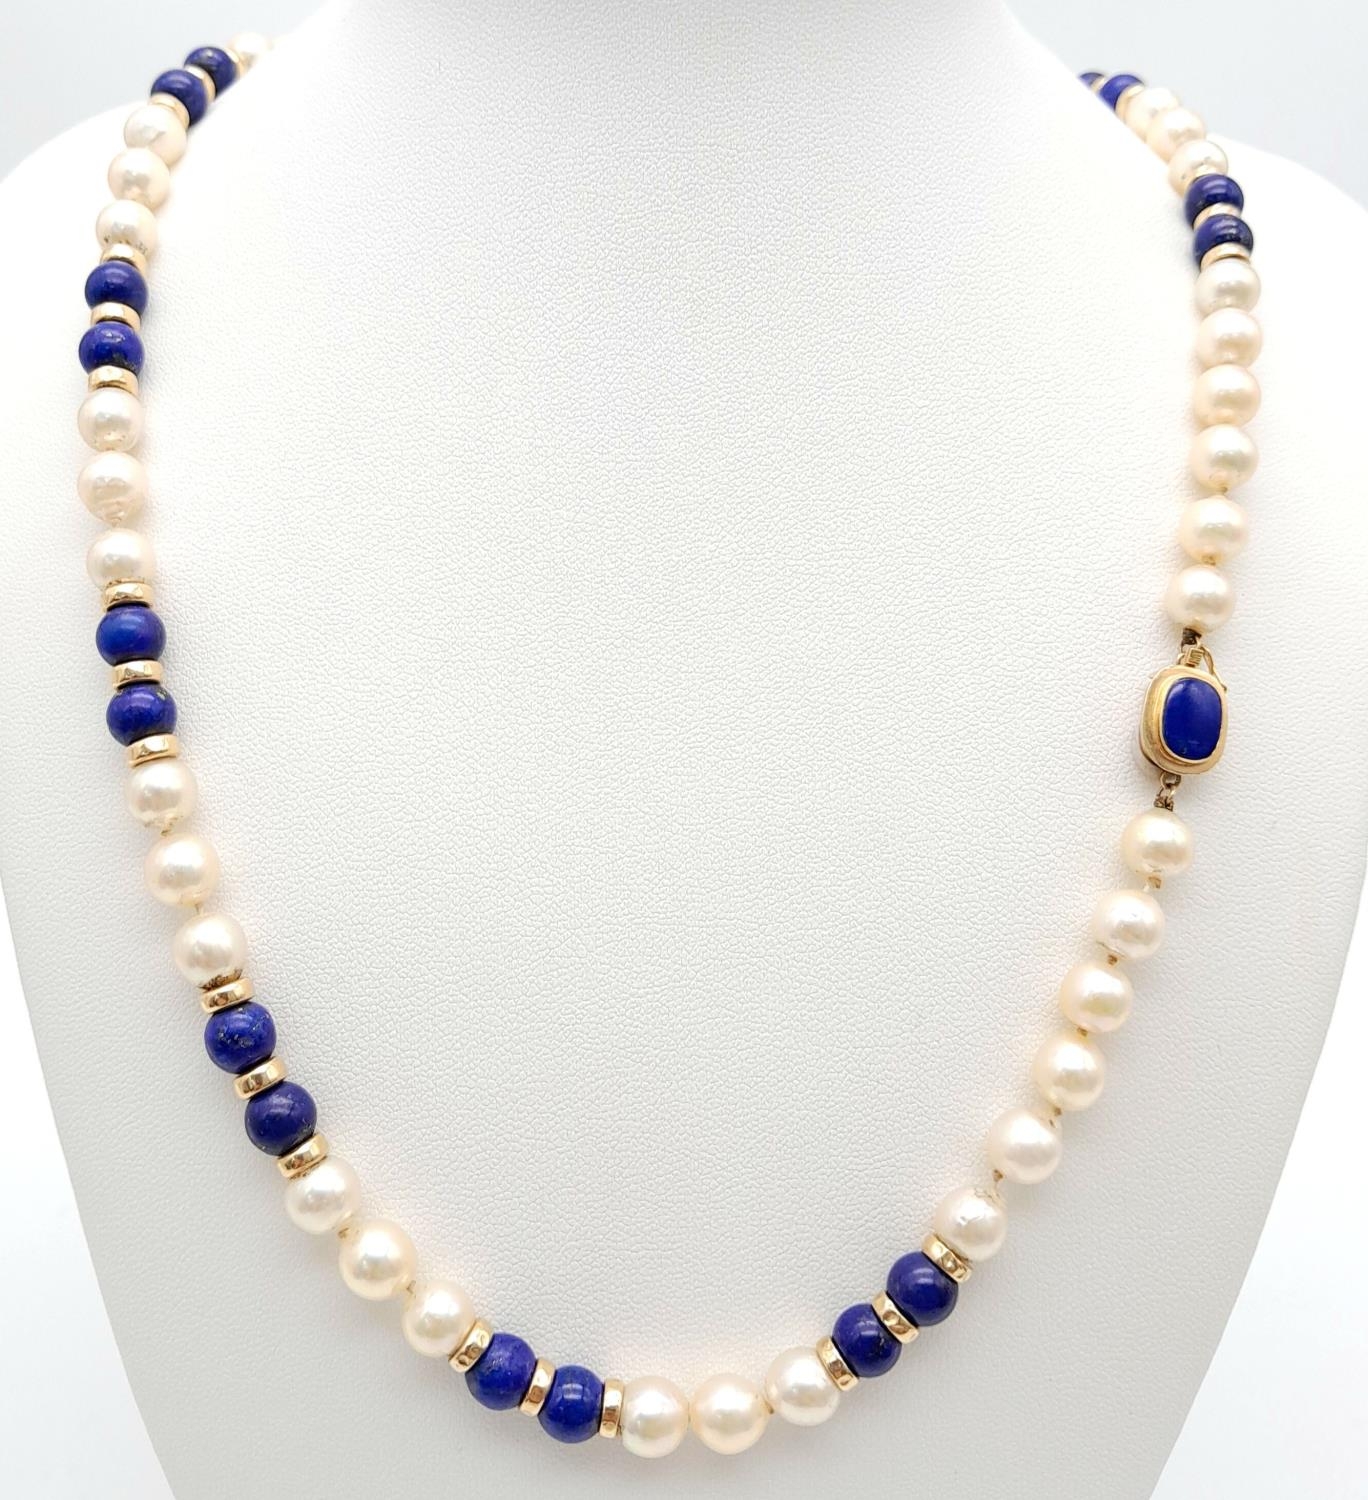 A Lapis and Pearl Necklace with 14K Gold Spacers and Clasp. 68cm